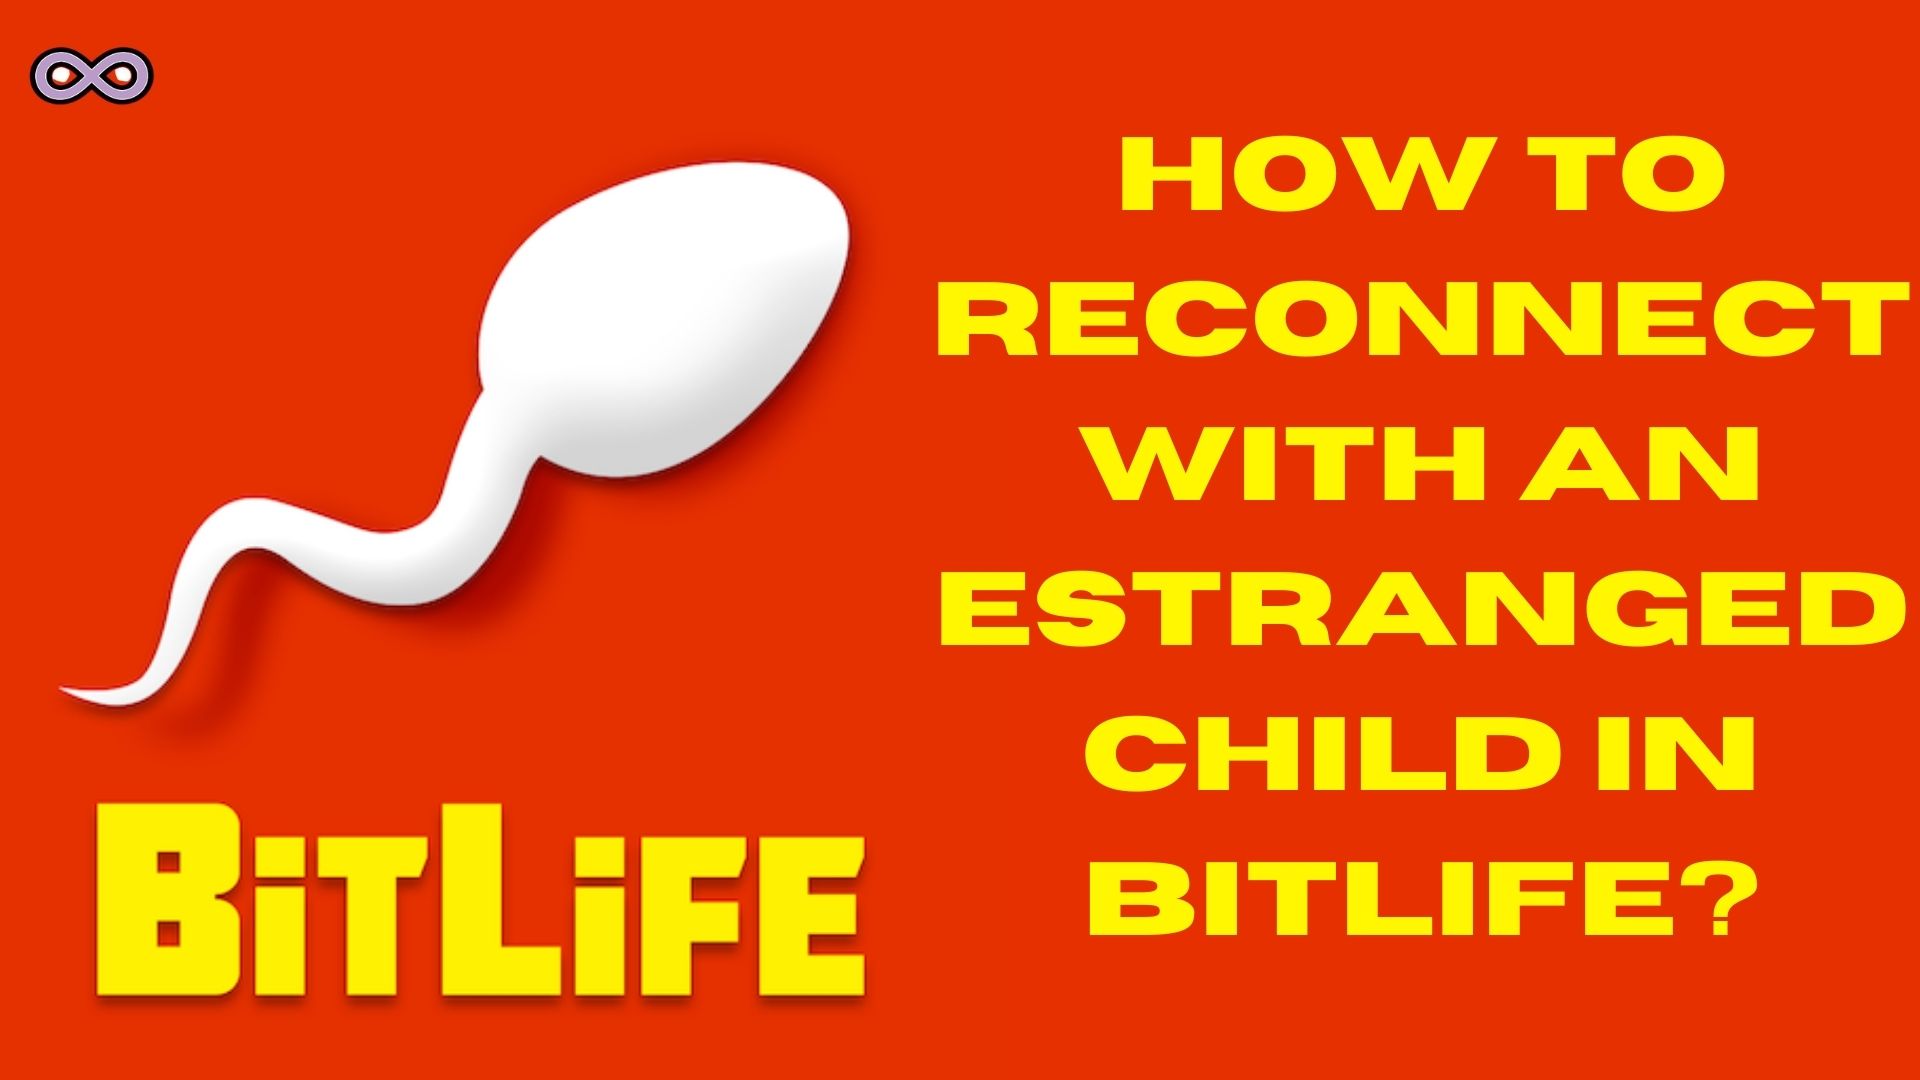 Easy Guide on How to Reconnect with an Estranged Child in BitLife? - Aspartin